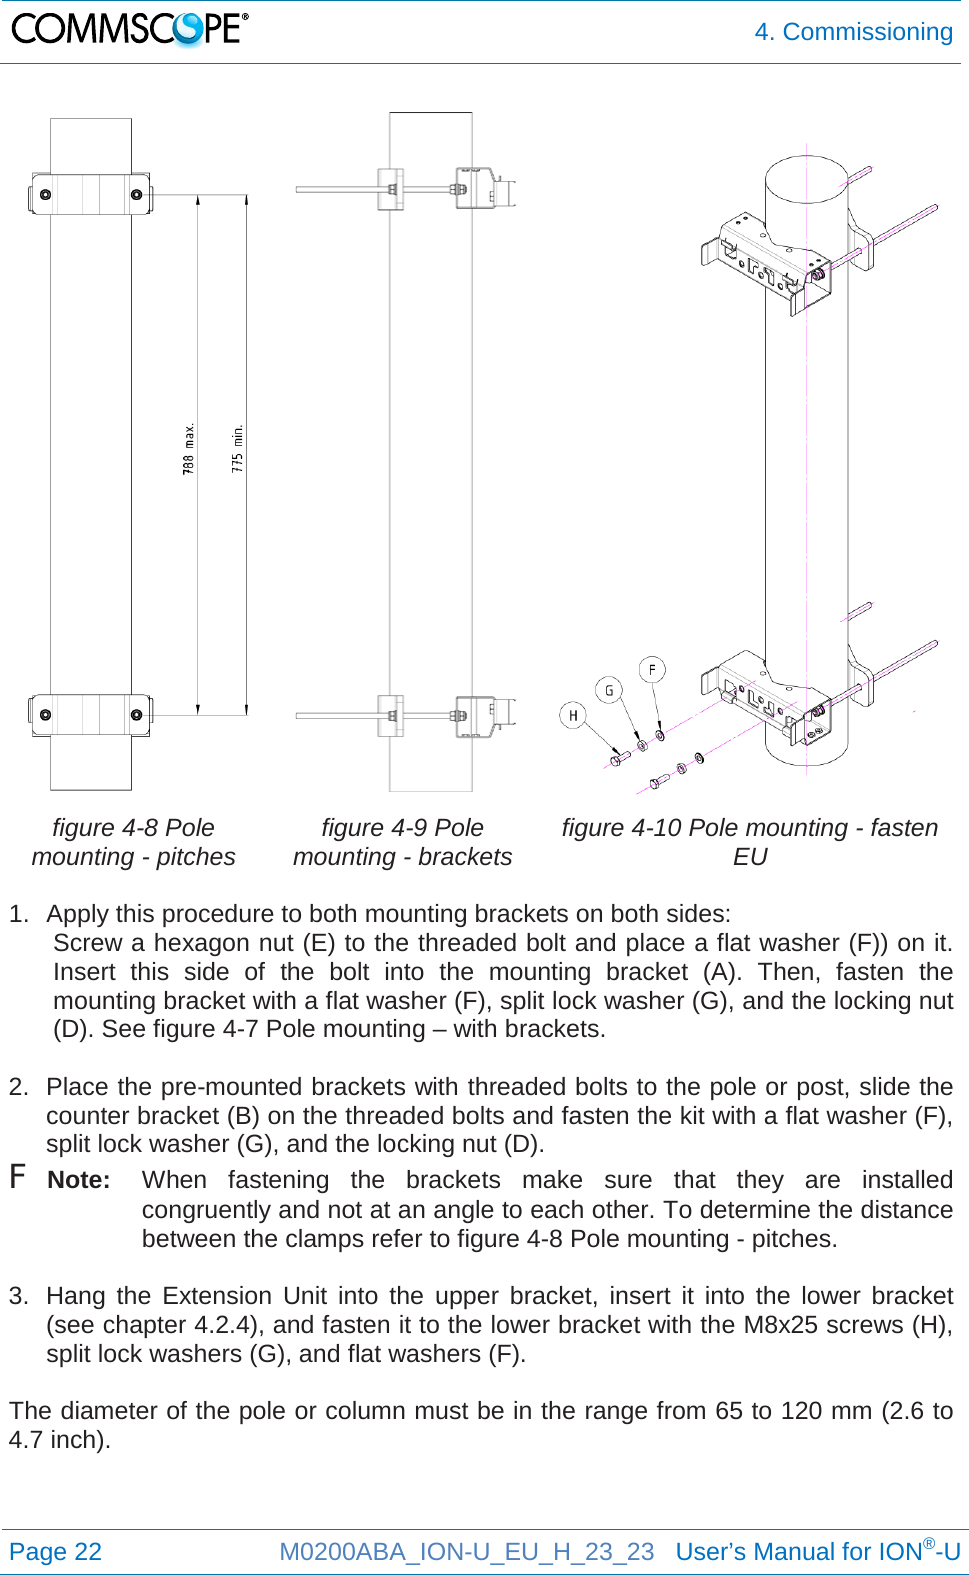  4. Commissioning  Page 22 M0200ABA_ION-U_EU_H_23_23   User’s Manual for ION®-U      figure 4-8 Pole mounting - pitches figure 4-9 Pole mounting - brackets figure 4-10 Pole mounting - fasten EU  1. Apply this procedure to both mounting brackets on both sides: Screw a hexagon nut (E) to the threaded bolt and place a flat washer (F)) on it. Insert this side of the bolt into the mounting bracket (A). Then,  fasten the mounting bracket with a flat washer (F), split lock washer (G), and the locking nut (D). See figure 4-7 Pole mounting – with brackets.  2. Place the pre-mounted brackets with threaded bolts to the pole or post, slide the counter bracket (B) on the threaded bolts and fasten the kit with a flat washer (F), split lock washer (G), and the locking nut (D). F Note: When fastening the brackets make sure that they are installed congruently and not at an angle to each other. To determine the distance between the clamps refer to figure 4-8 Pole mounting - pitches.  3. Hang the Extension Unit into the upper bracket, insert it into the lower bracket (see chapter 4.2.4), and fasten it to the lower bracket with the M8x25 screws (H), split lock washers (G), and flat washers (F).  The diameter of the pole or column must be in the range from 65 to 120 mm (2.6 to 4.7 inch).    